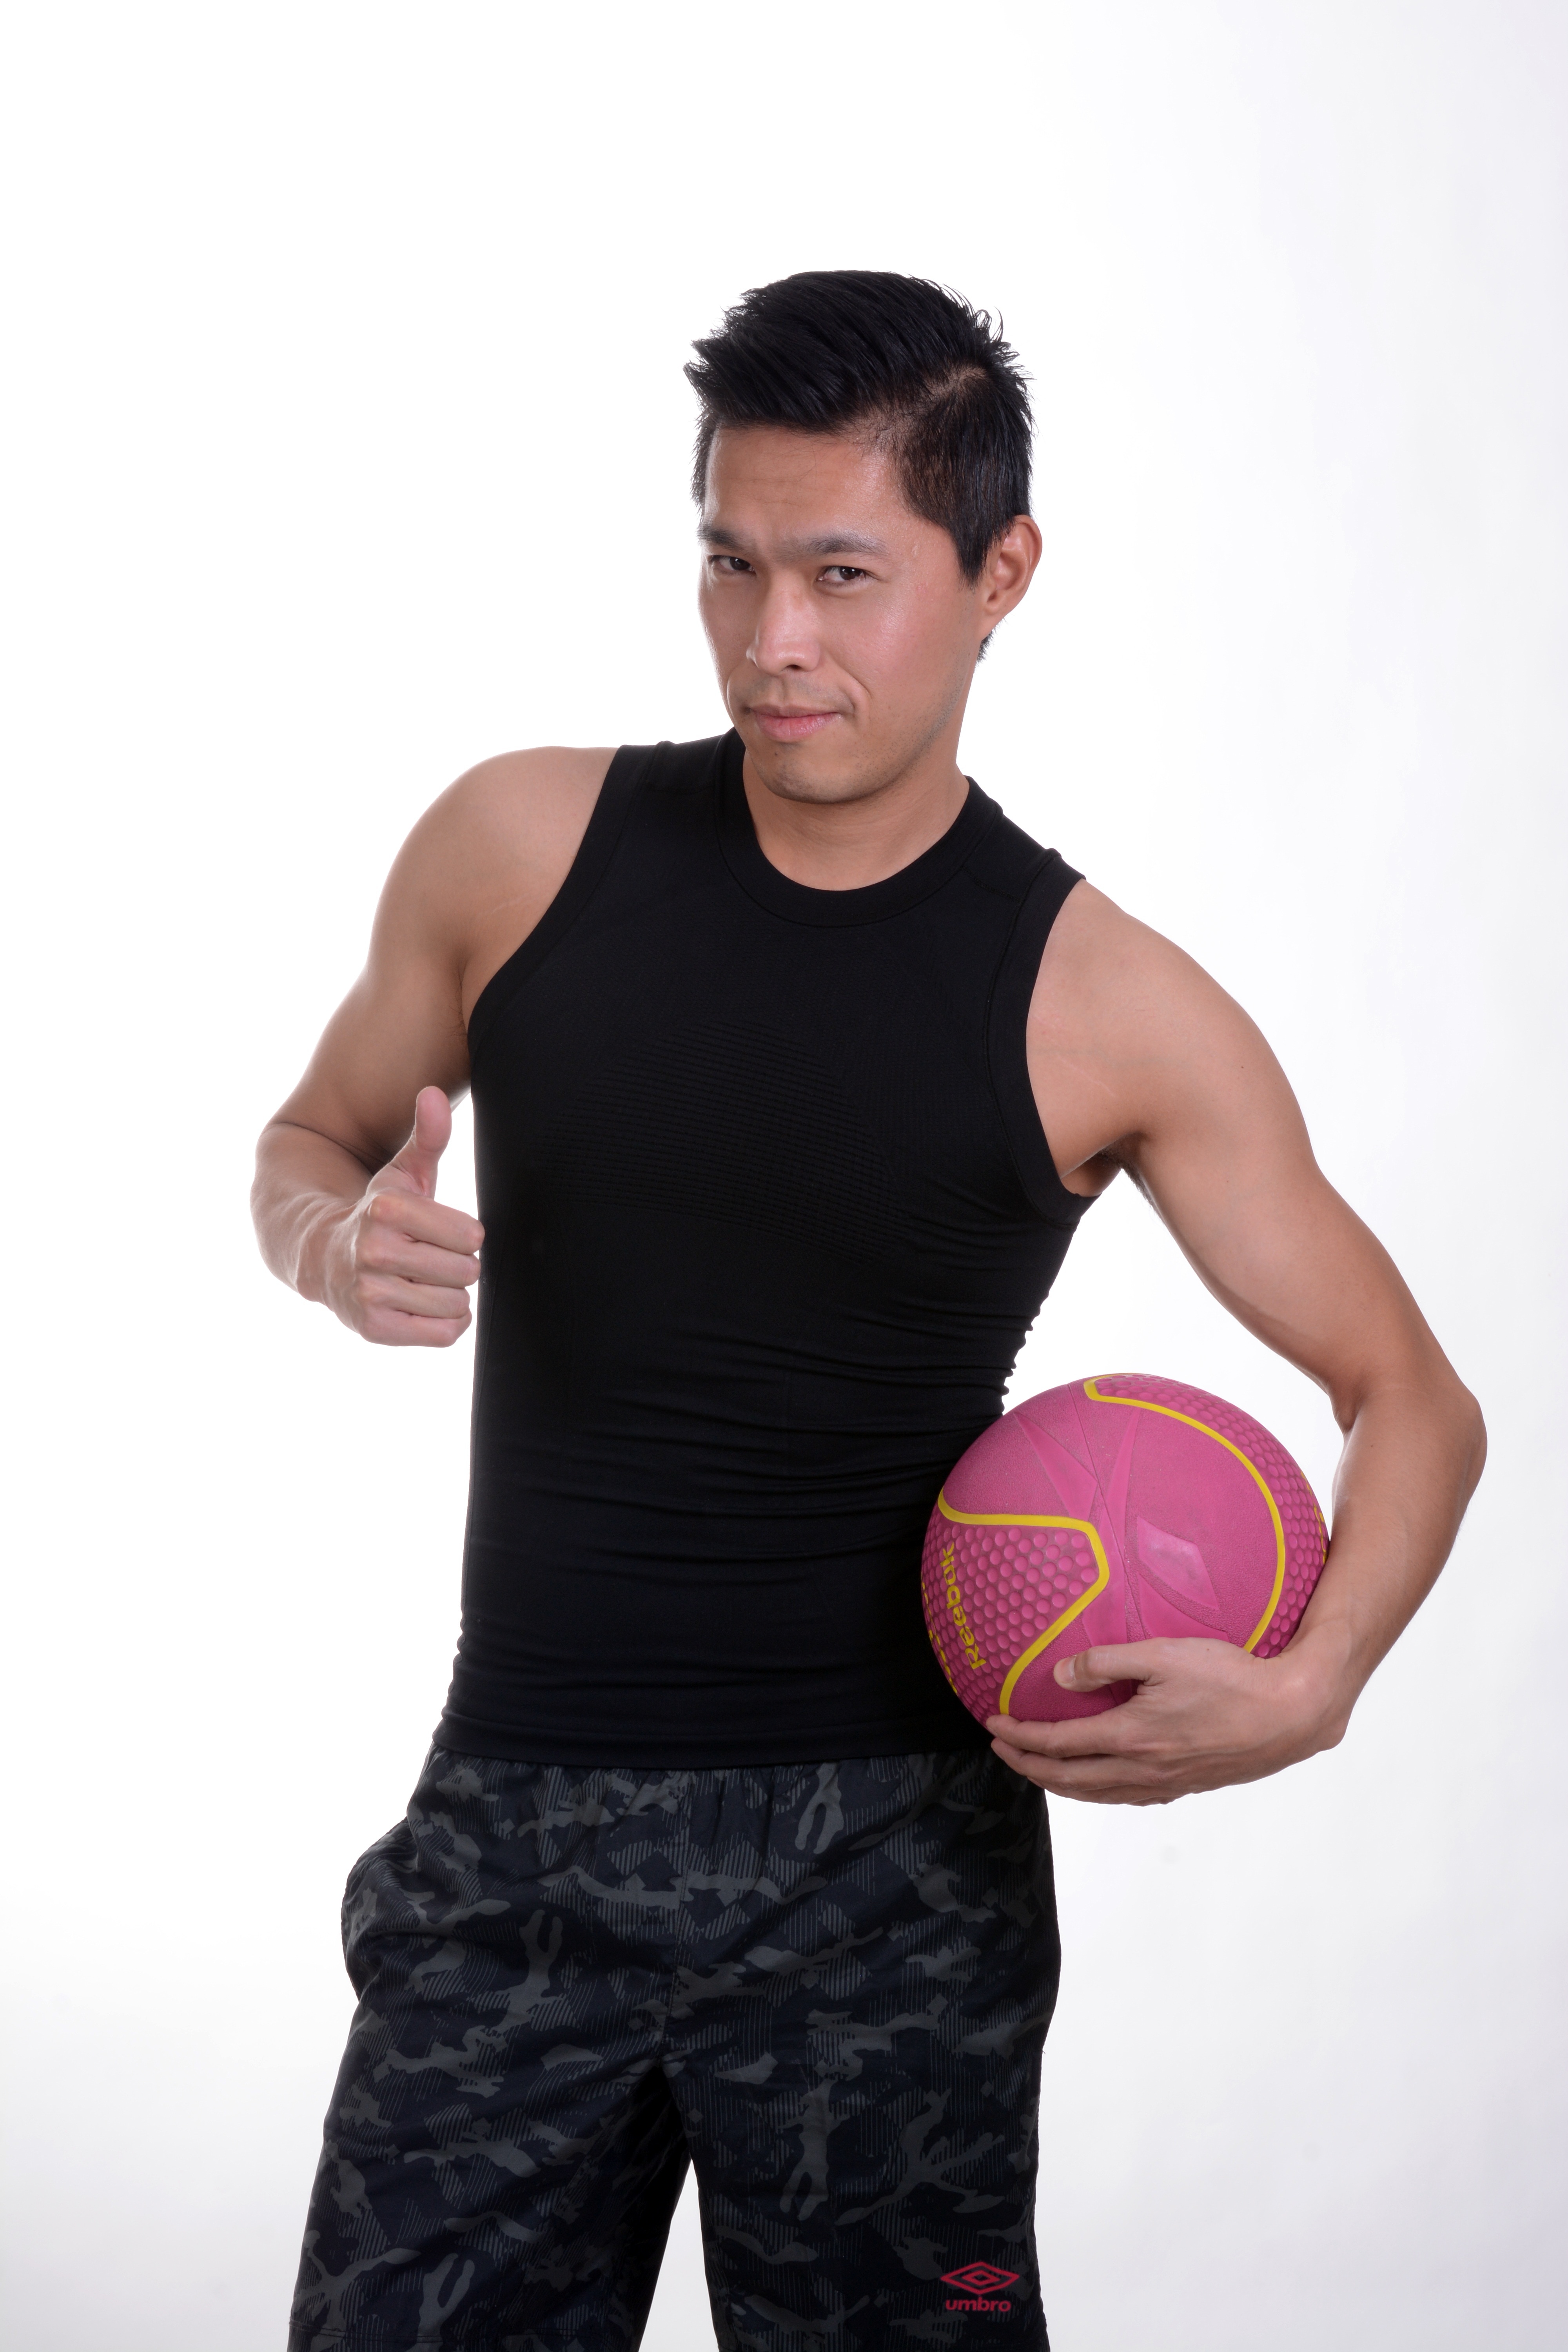 men's black sleeveless crew neck shirt, black-and-gray bottoms with pink exercise ball